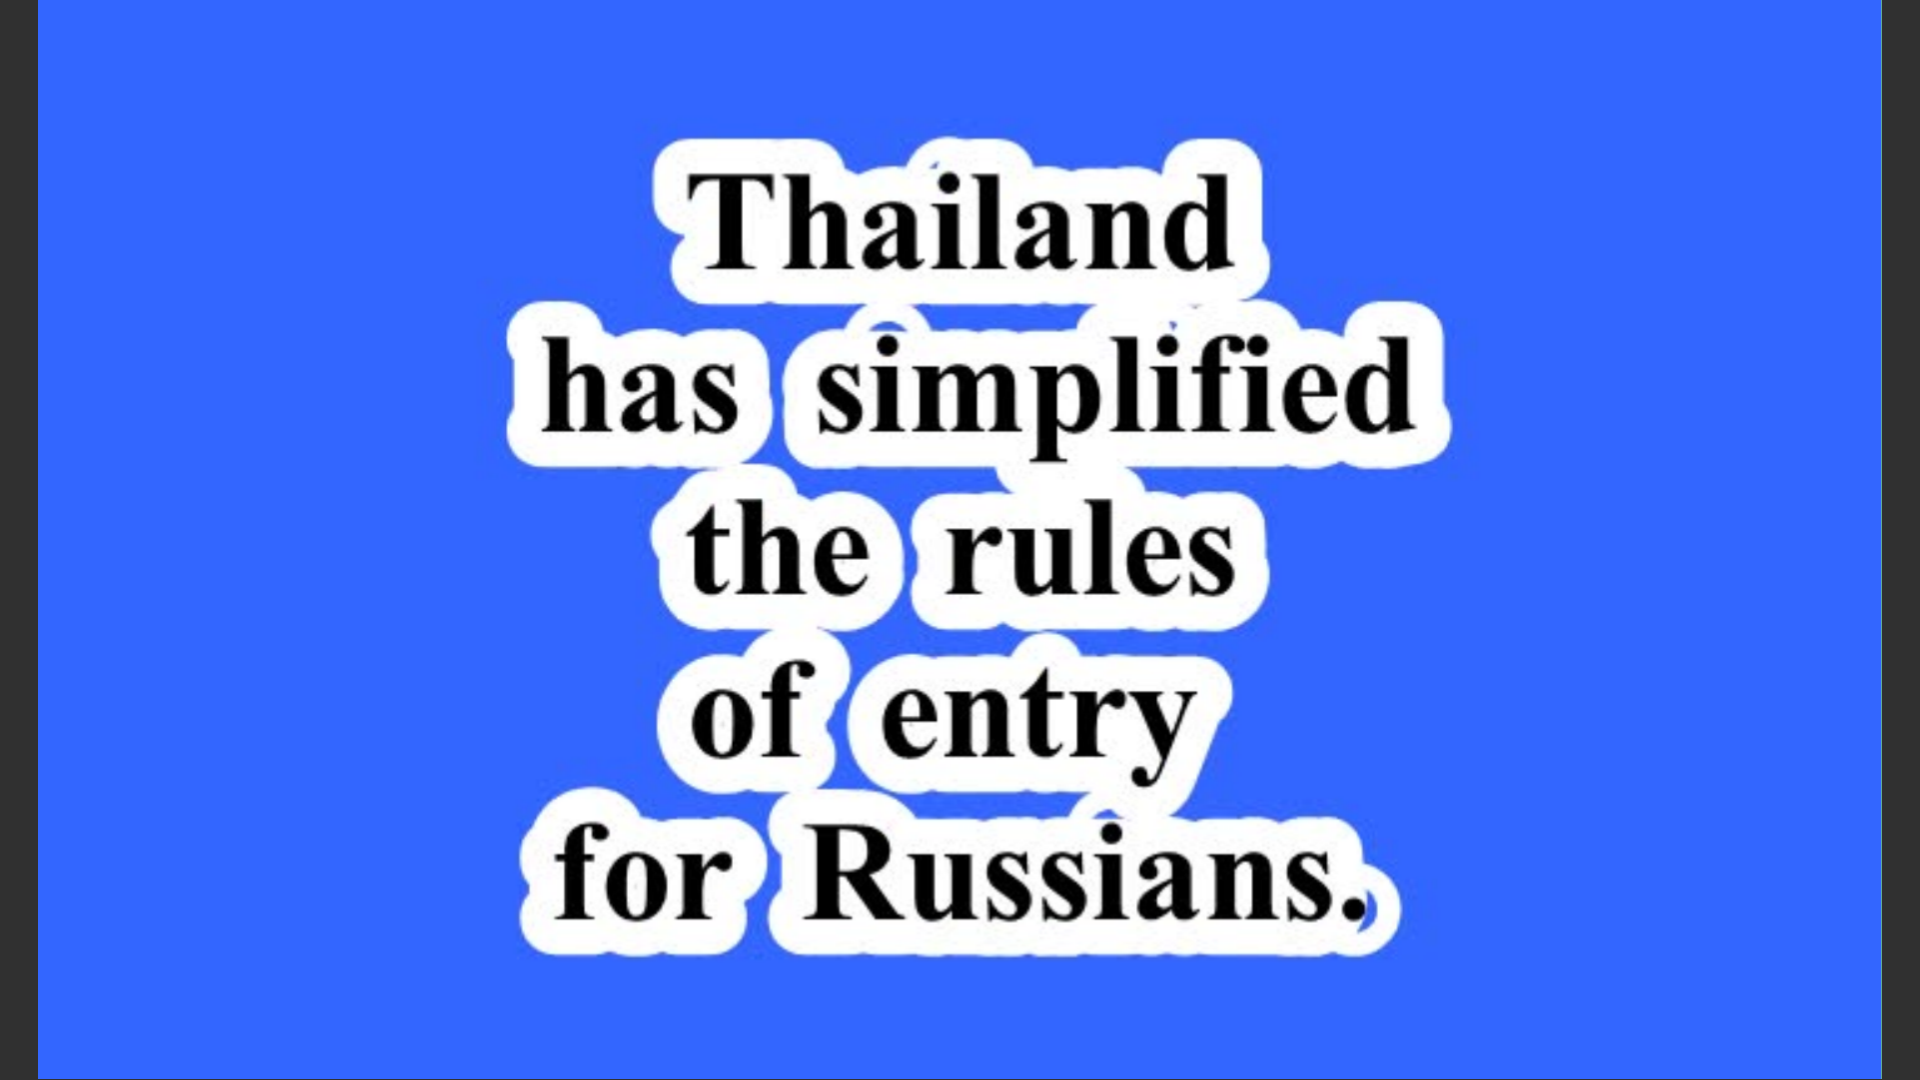 Thailand has simplified the rules of entry for Russians.